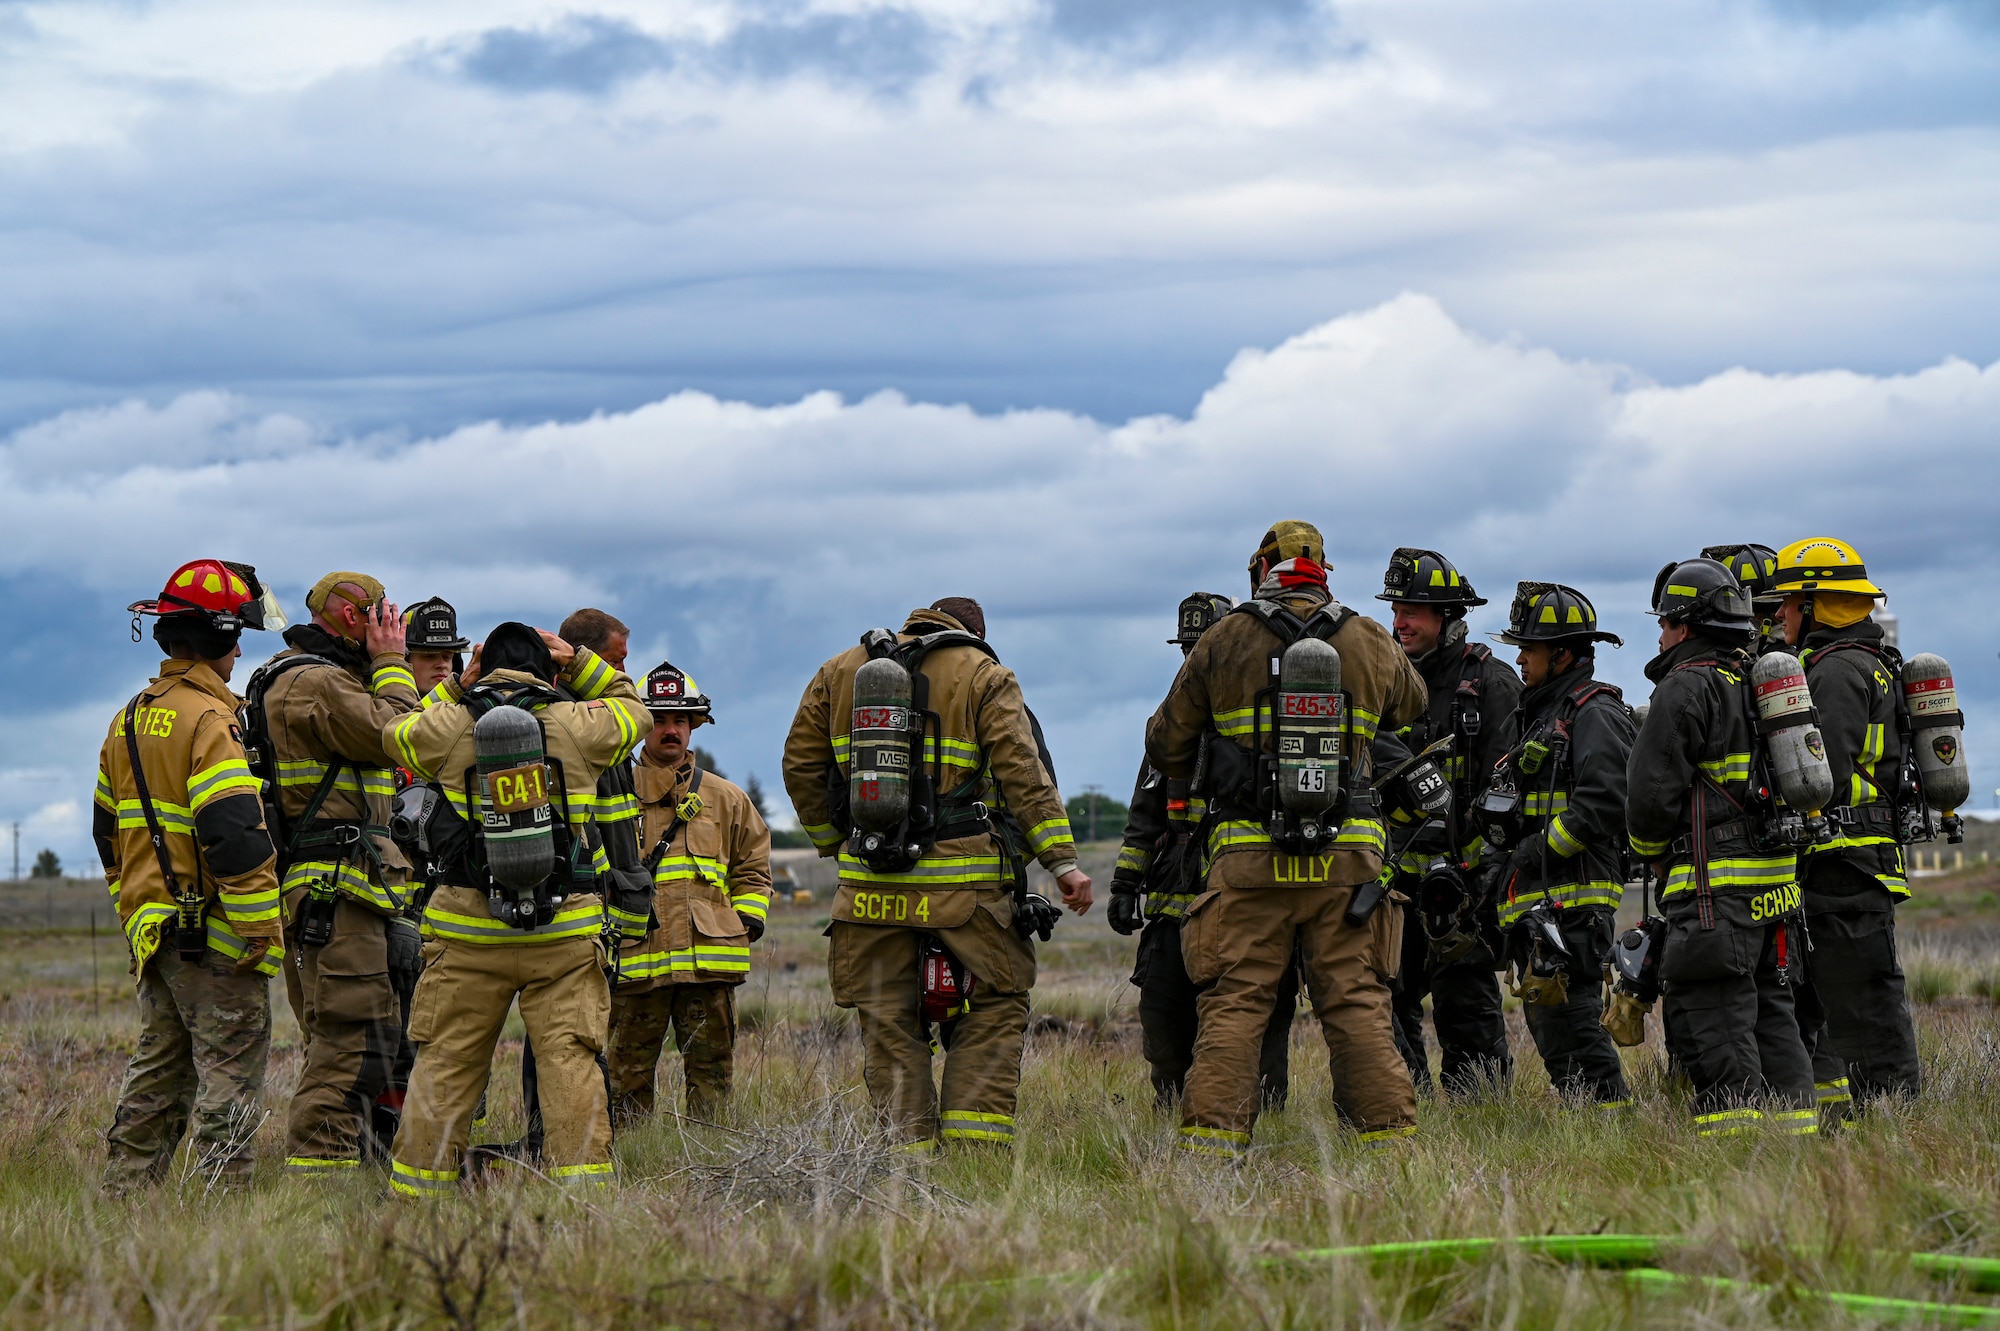 Firefighters respond to simulated fire